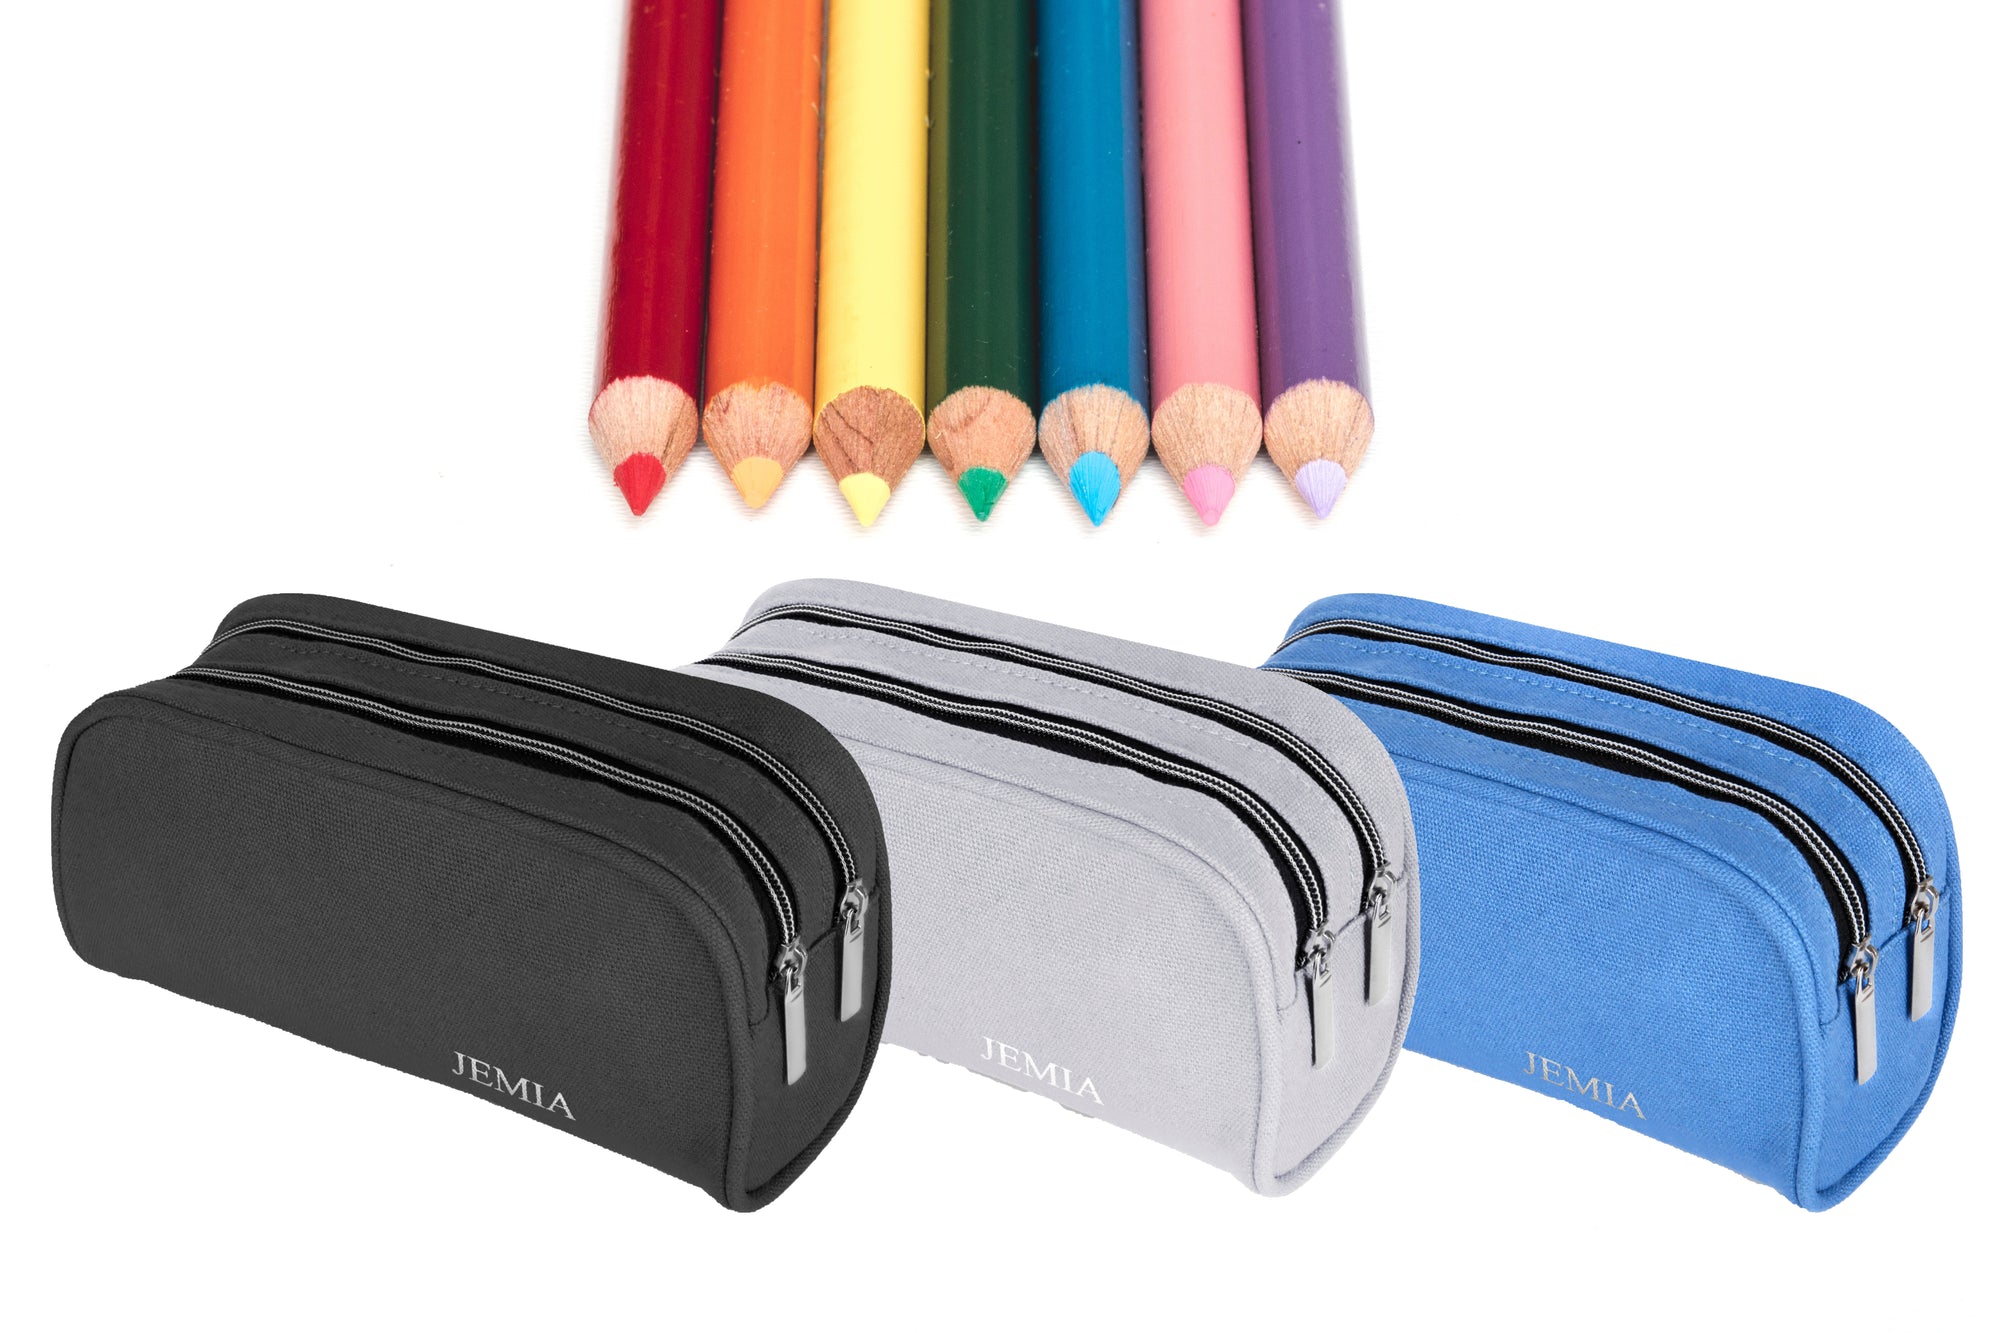 Three New Color Variation for Pencil Case with 2 Independent Compartments